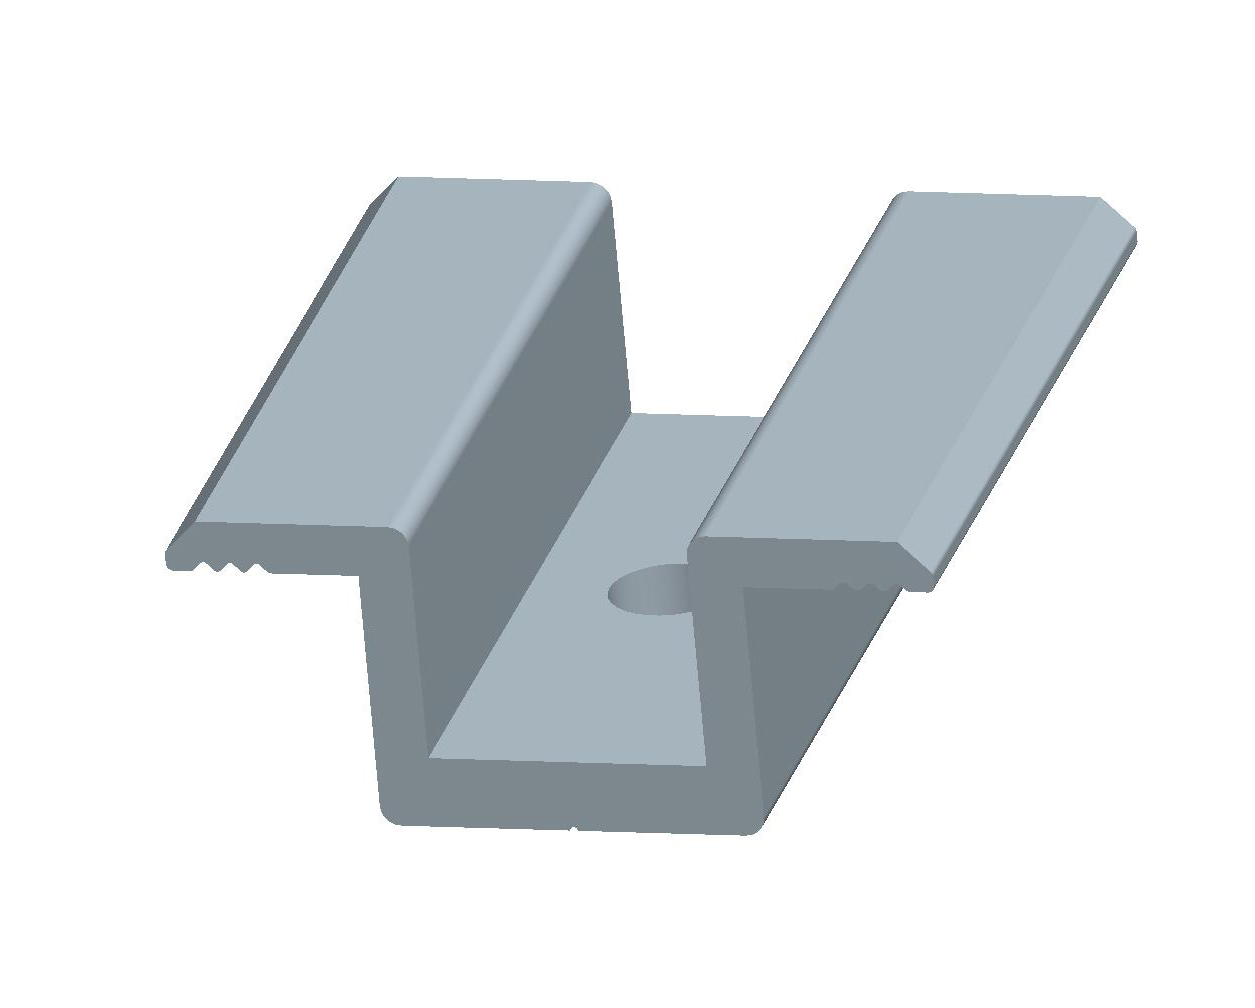 Eend and inter clamp for railless ballasted roof mounting system